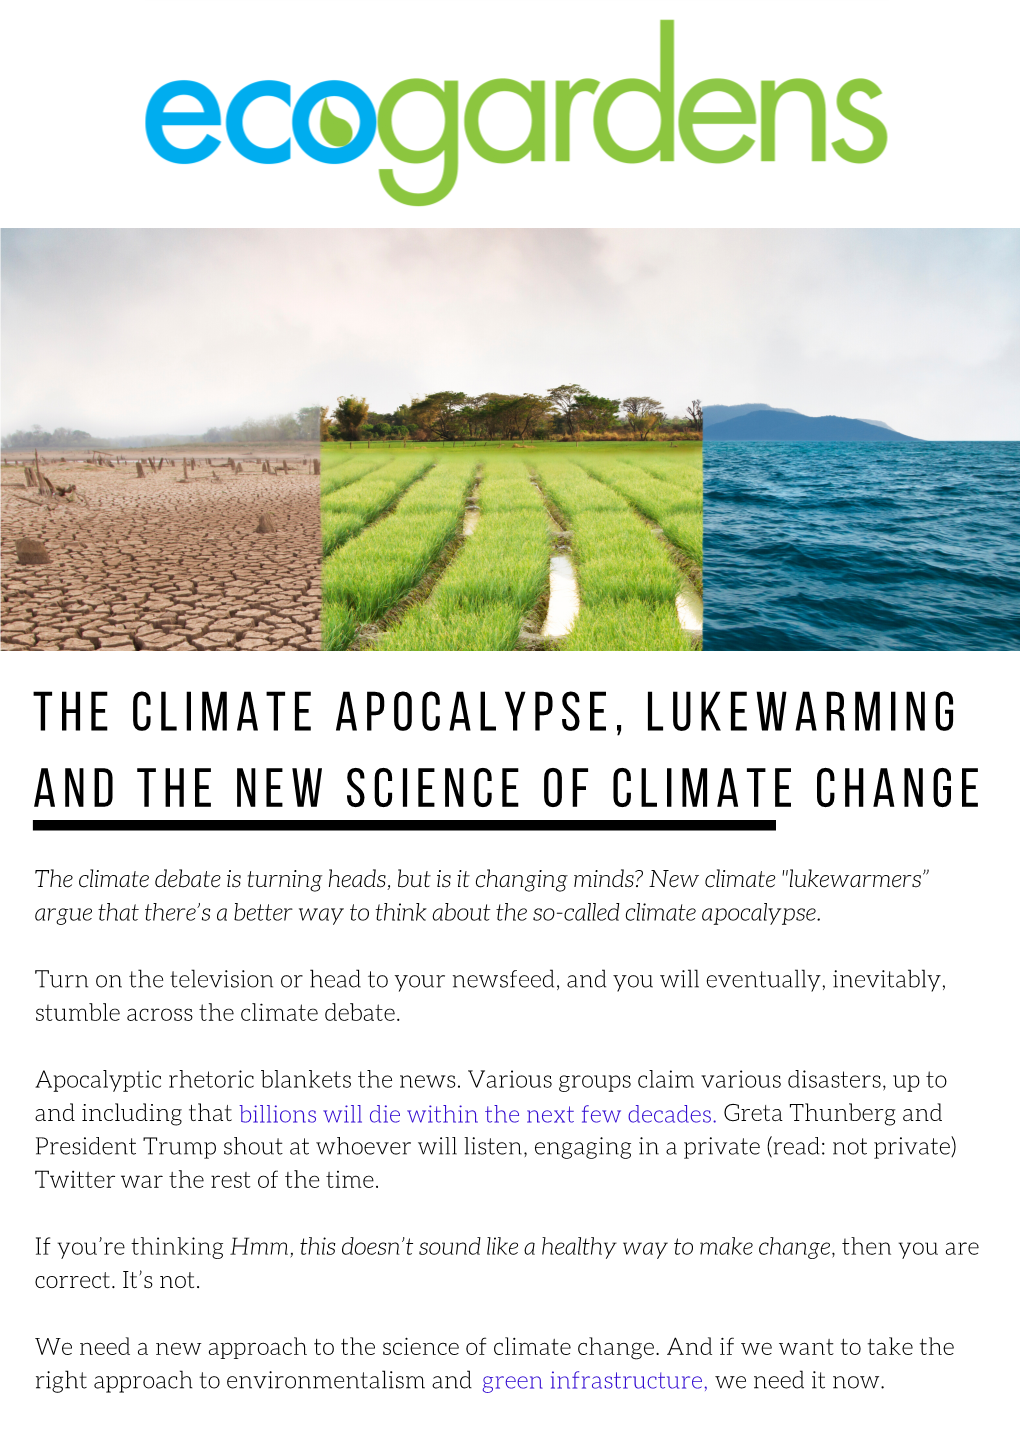 The Climate a Pocaly Pse, Lukew Arming and the New Science Of